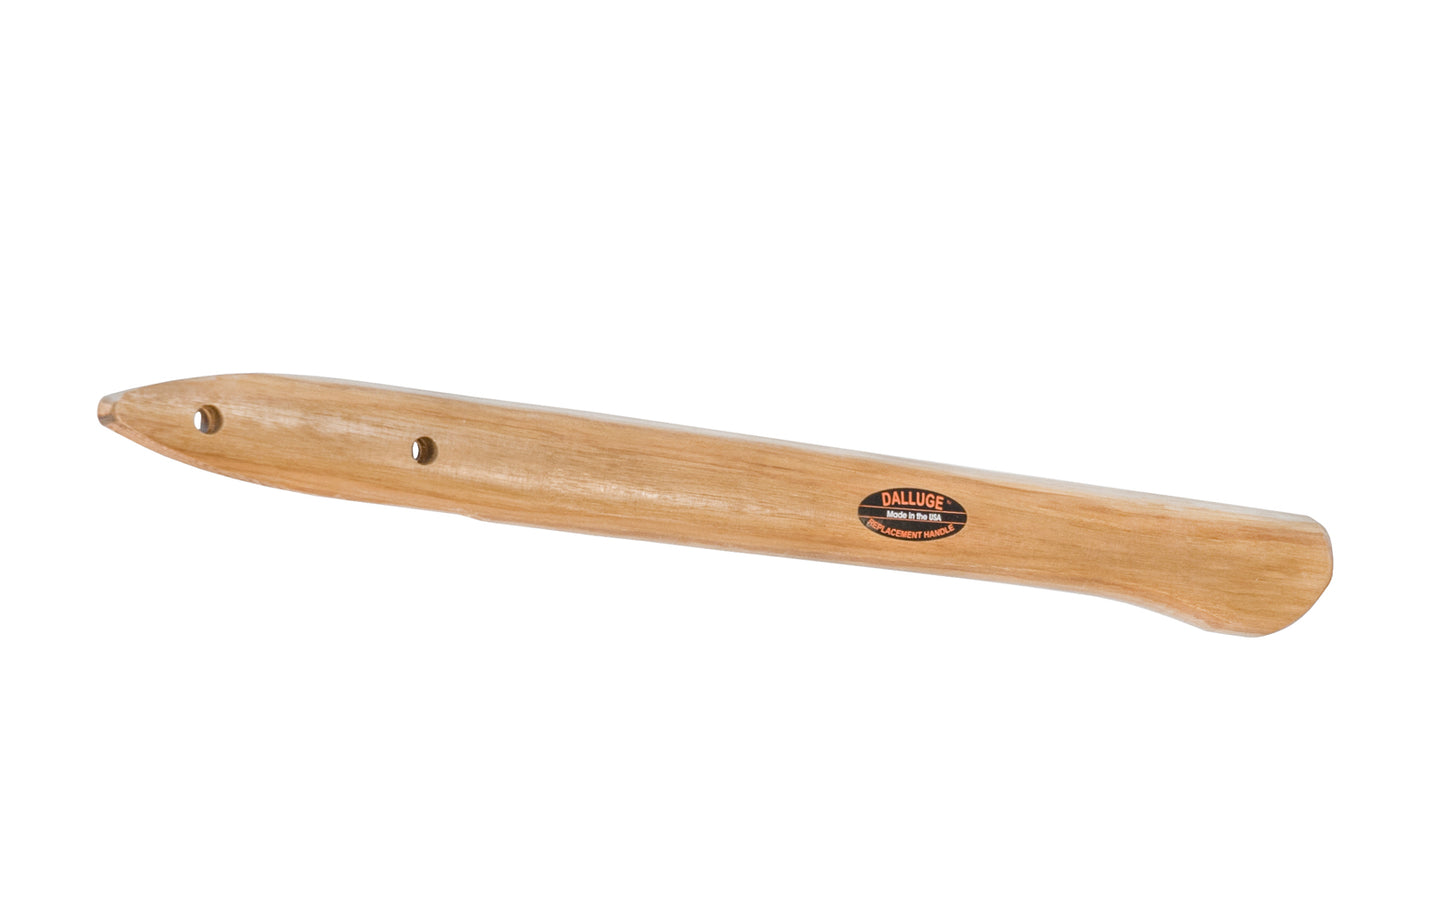 The Dalluge 03800 replacement handle is a sleek 15-1/2" straight, aerodynamically contoured handle made from top quality American hickory machine-gauged to precise balance, then double-sanded, buffed & lacquered to assure maximum comfort. 03800. Includes 2 male & 2 female patch screws, & two hex wrenches.  Vaughan & Bushnell Mfg.   Made in USA.